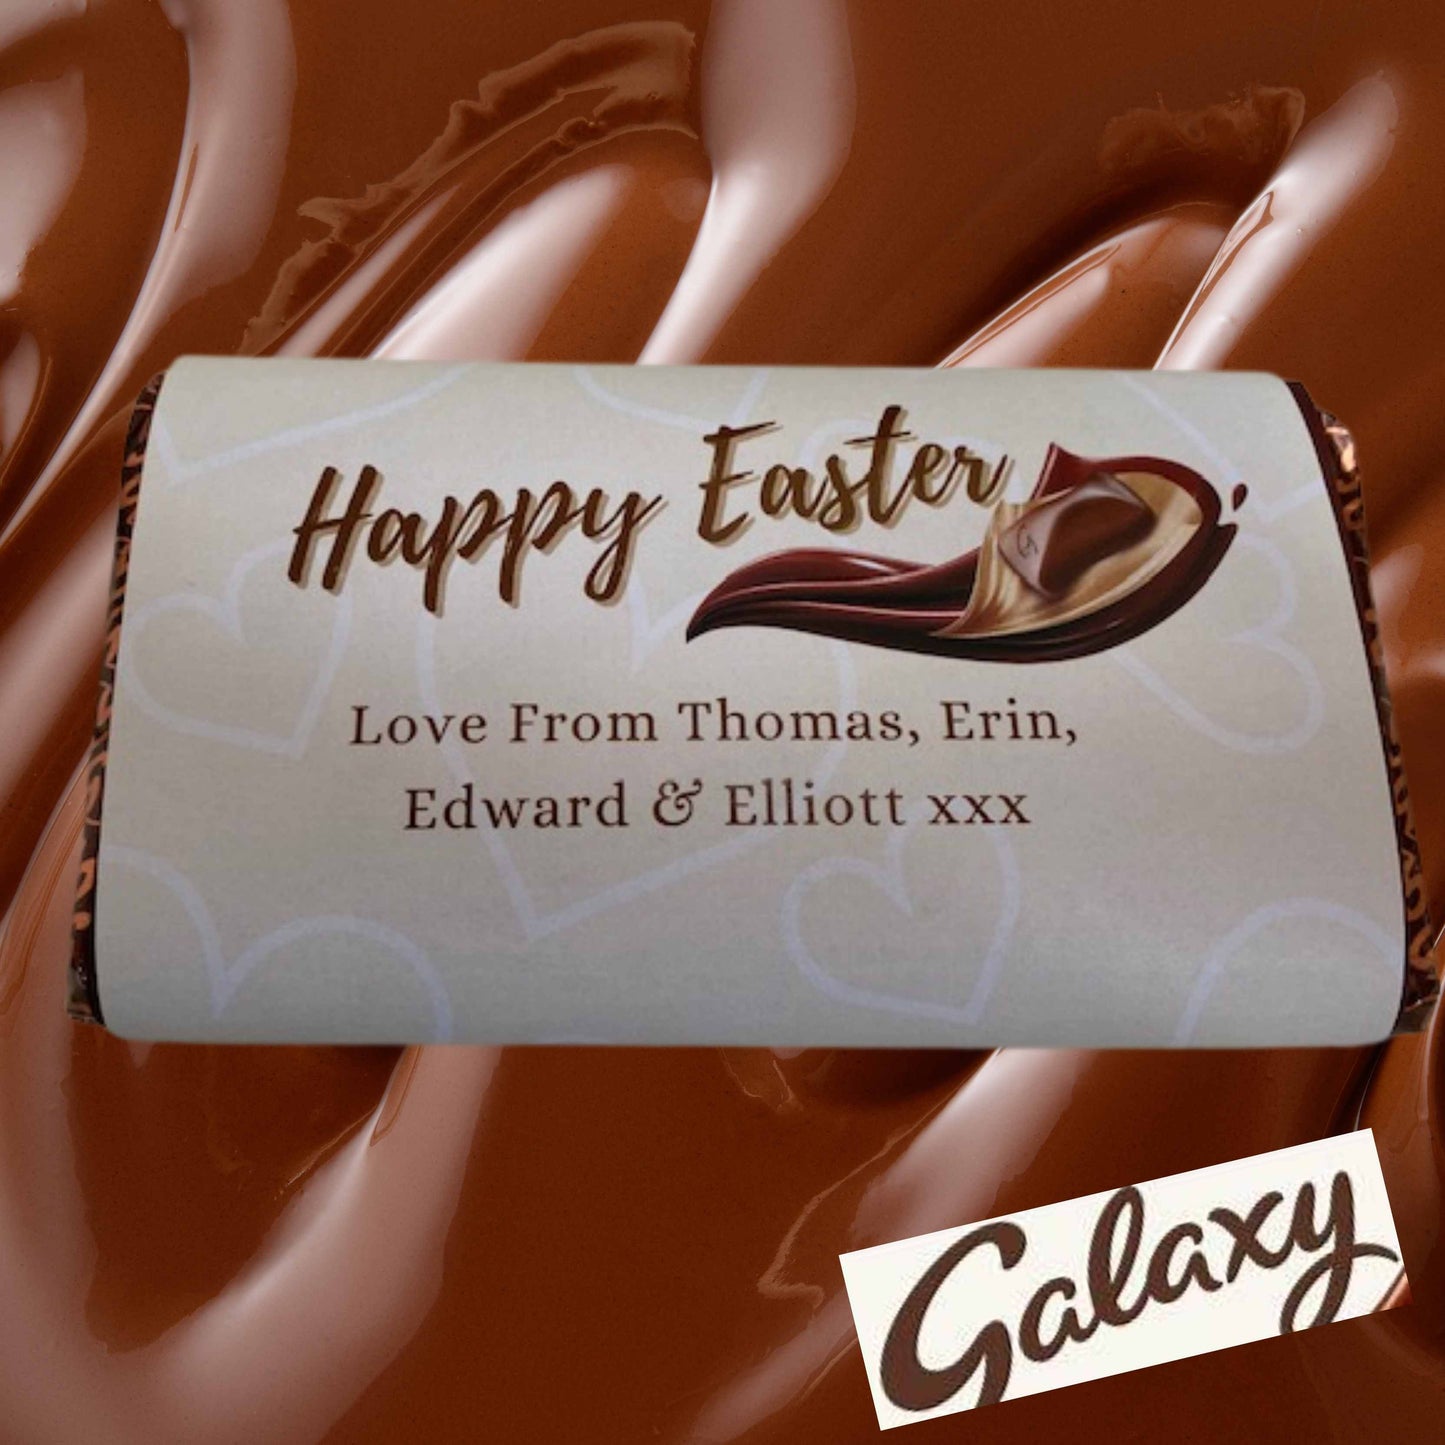 Happy Easter wrapped bar of Galaxy chocolate personalised